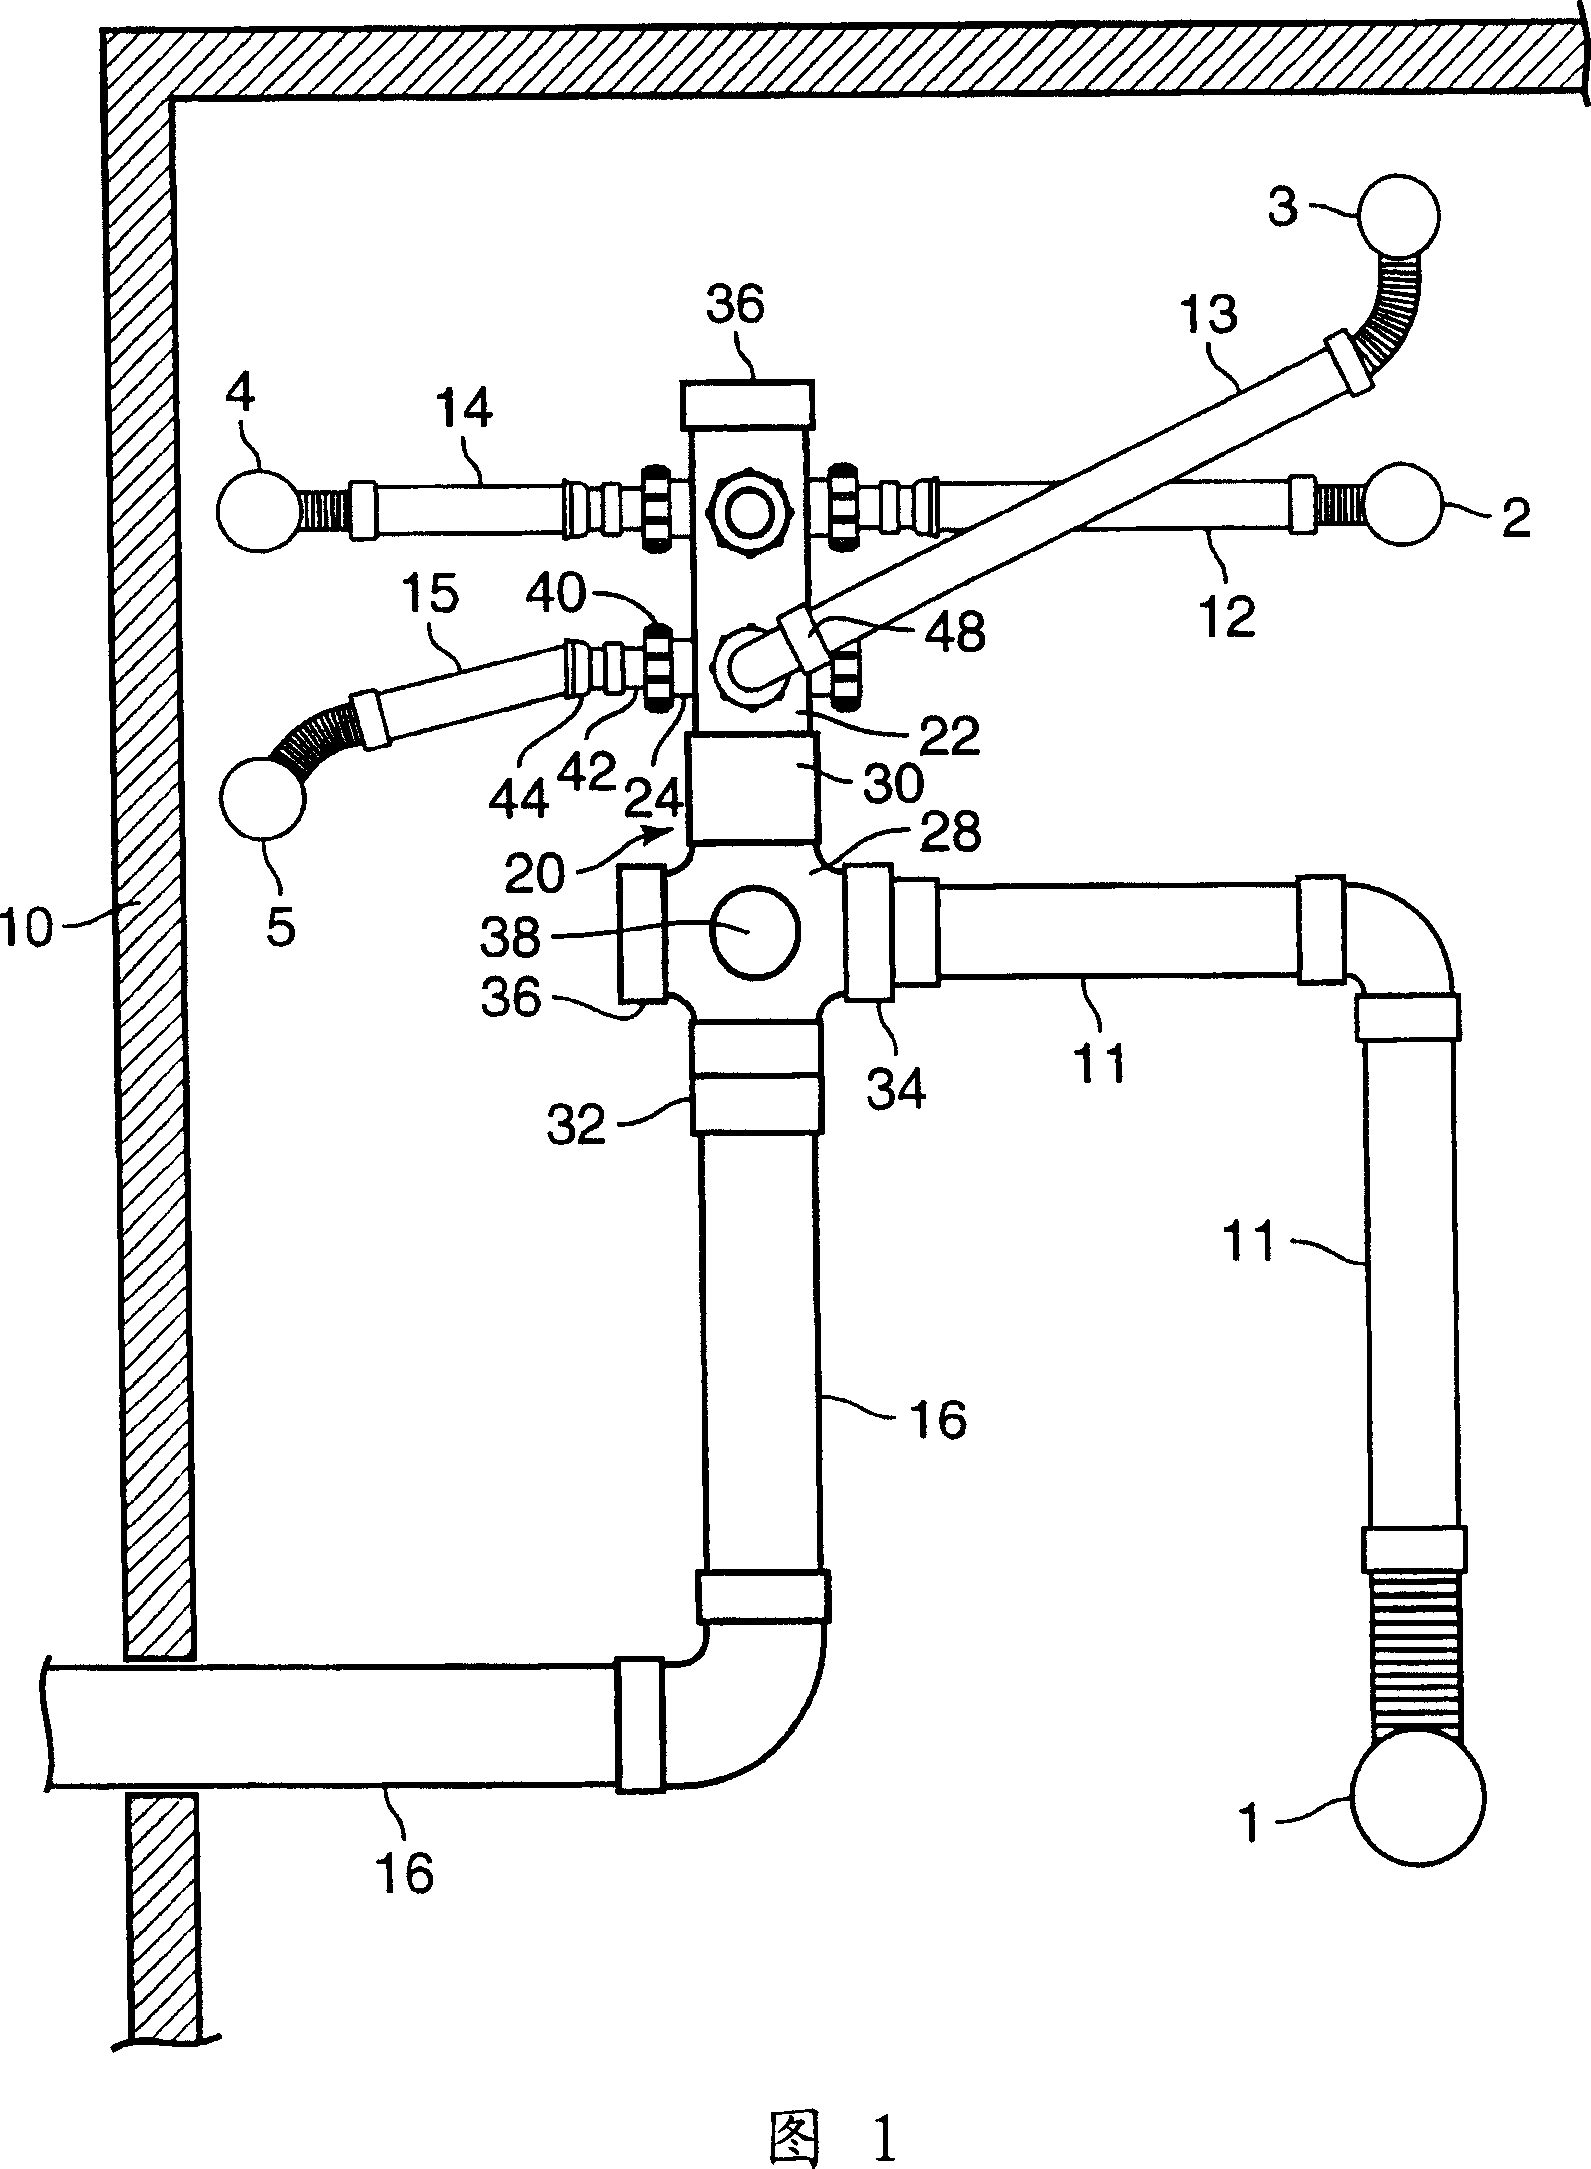 Drain connection and drain pipe using same